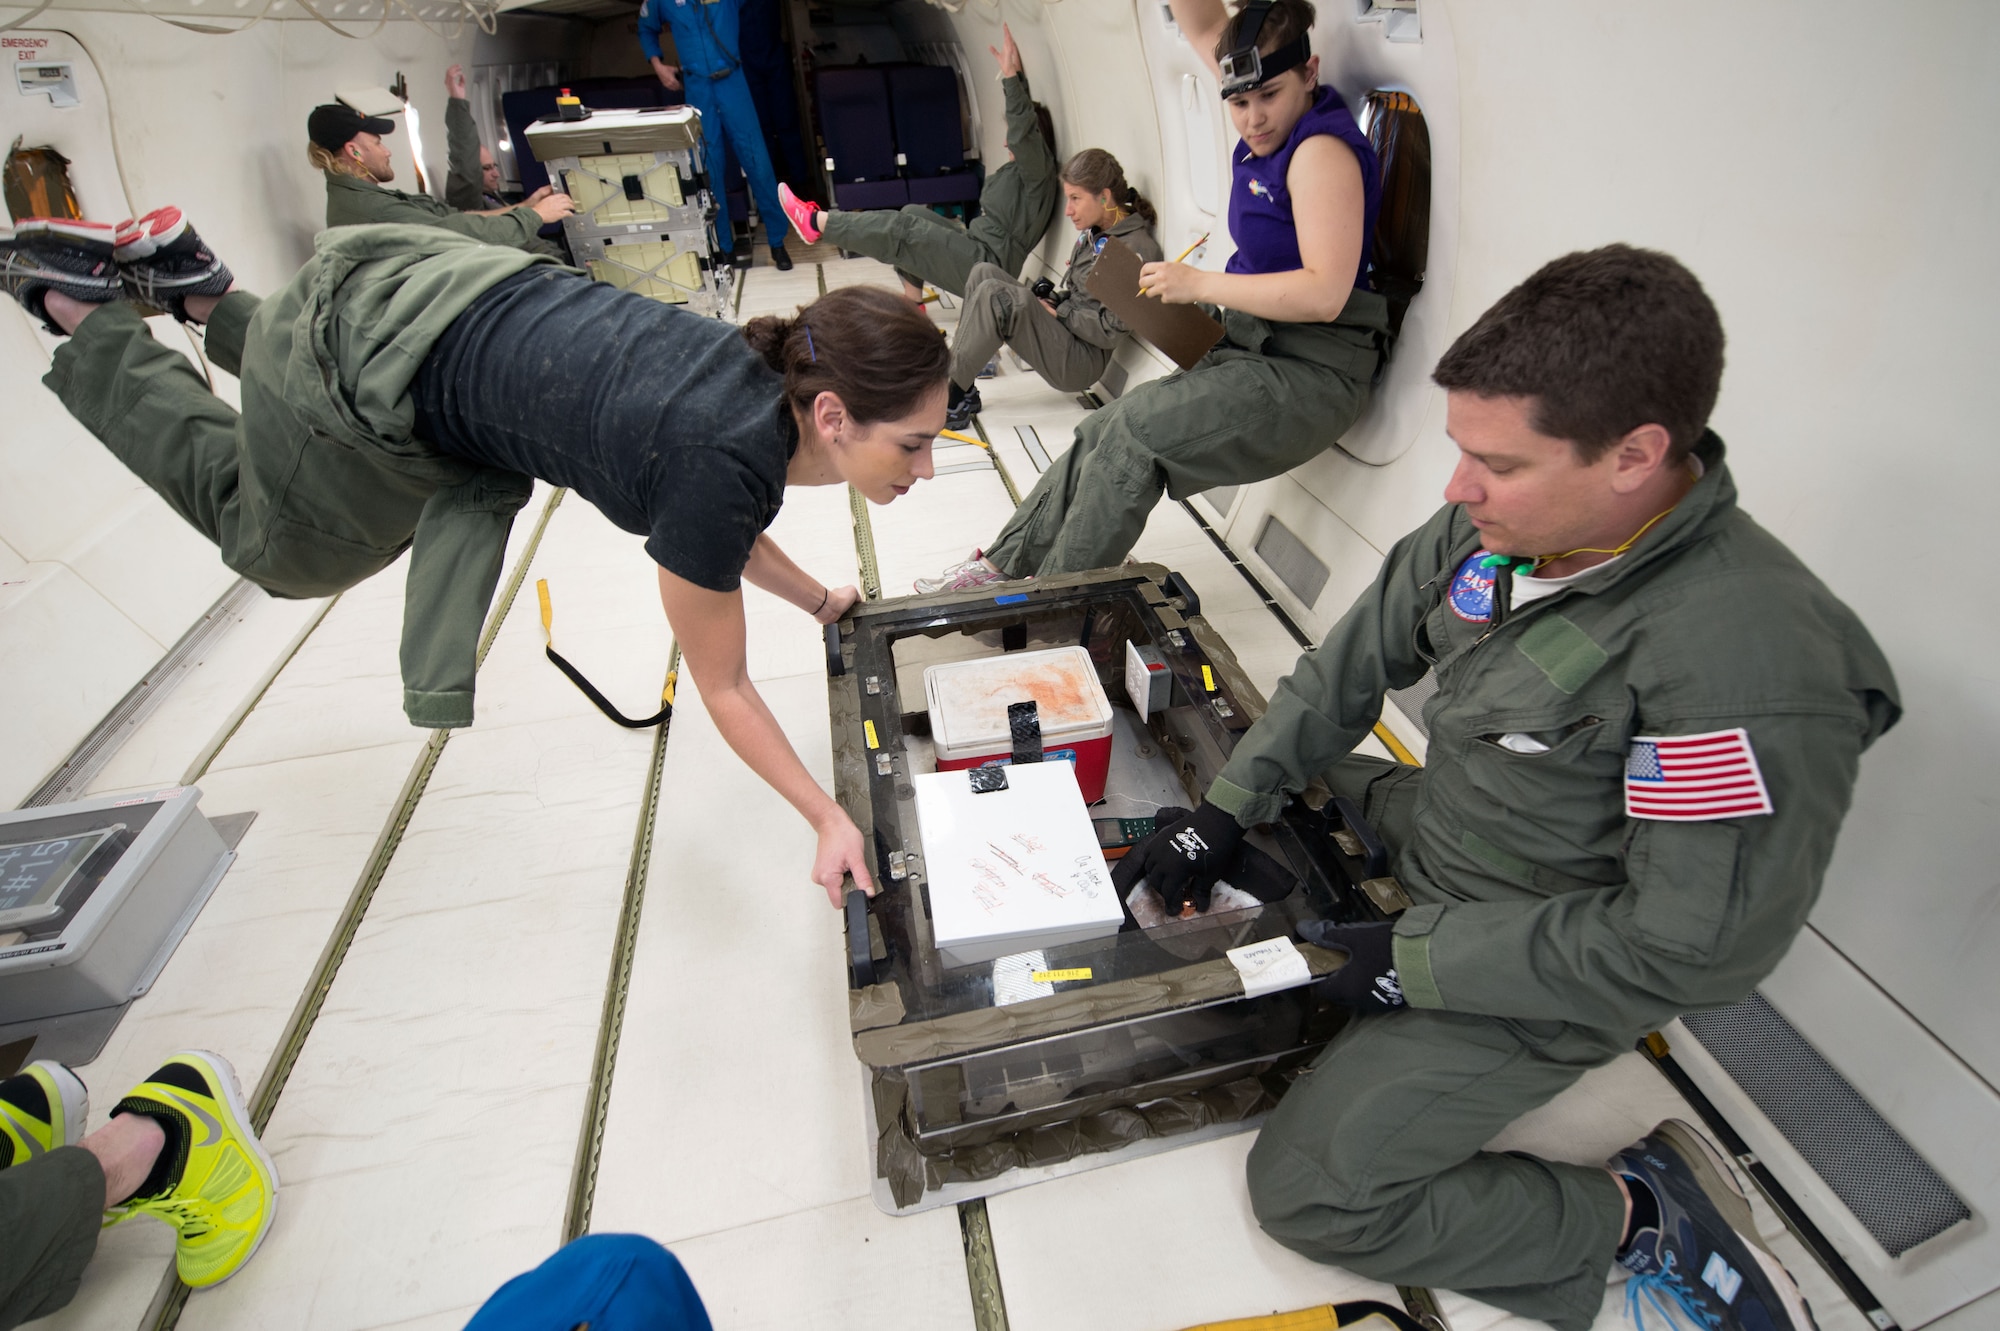 Researchers gathered data for their foam experiment during
a parabolic flight in 2015. Join Chief Nursing Officer from The Center for Aerospace Nursing Excellence, Scott Rhoades, on Sept. 24 as he makes two special presentations describing his experience with freefall aboard a parabolic flight, such as those used to train astronauts. The first presentation will begin at 11 a.m. and will repeat at 1:30 p.m. Credit: NASA Photo by James Blair
